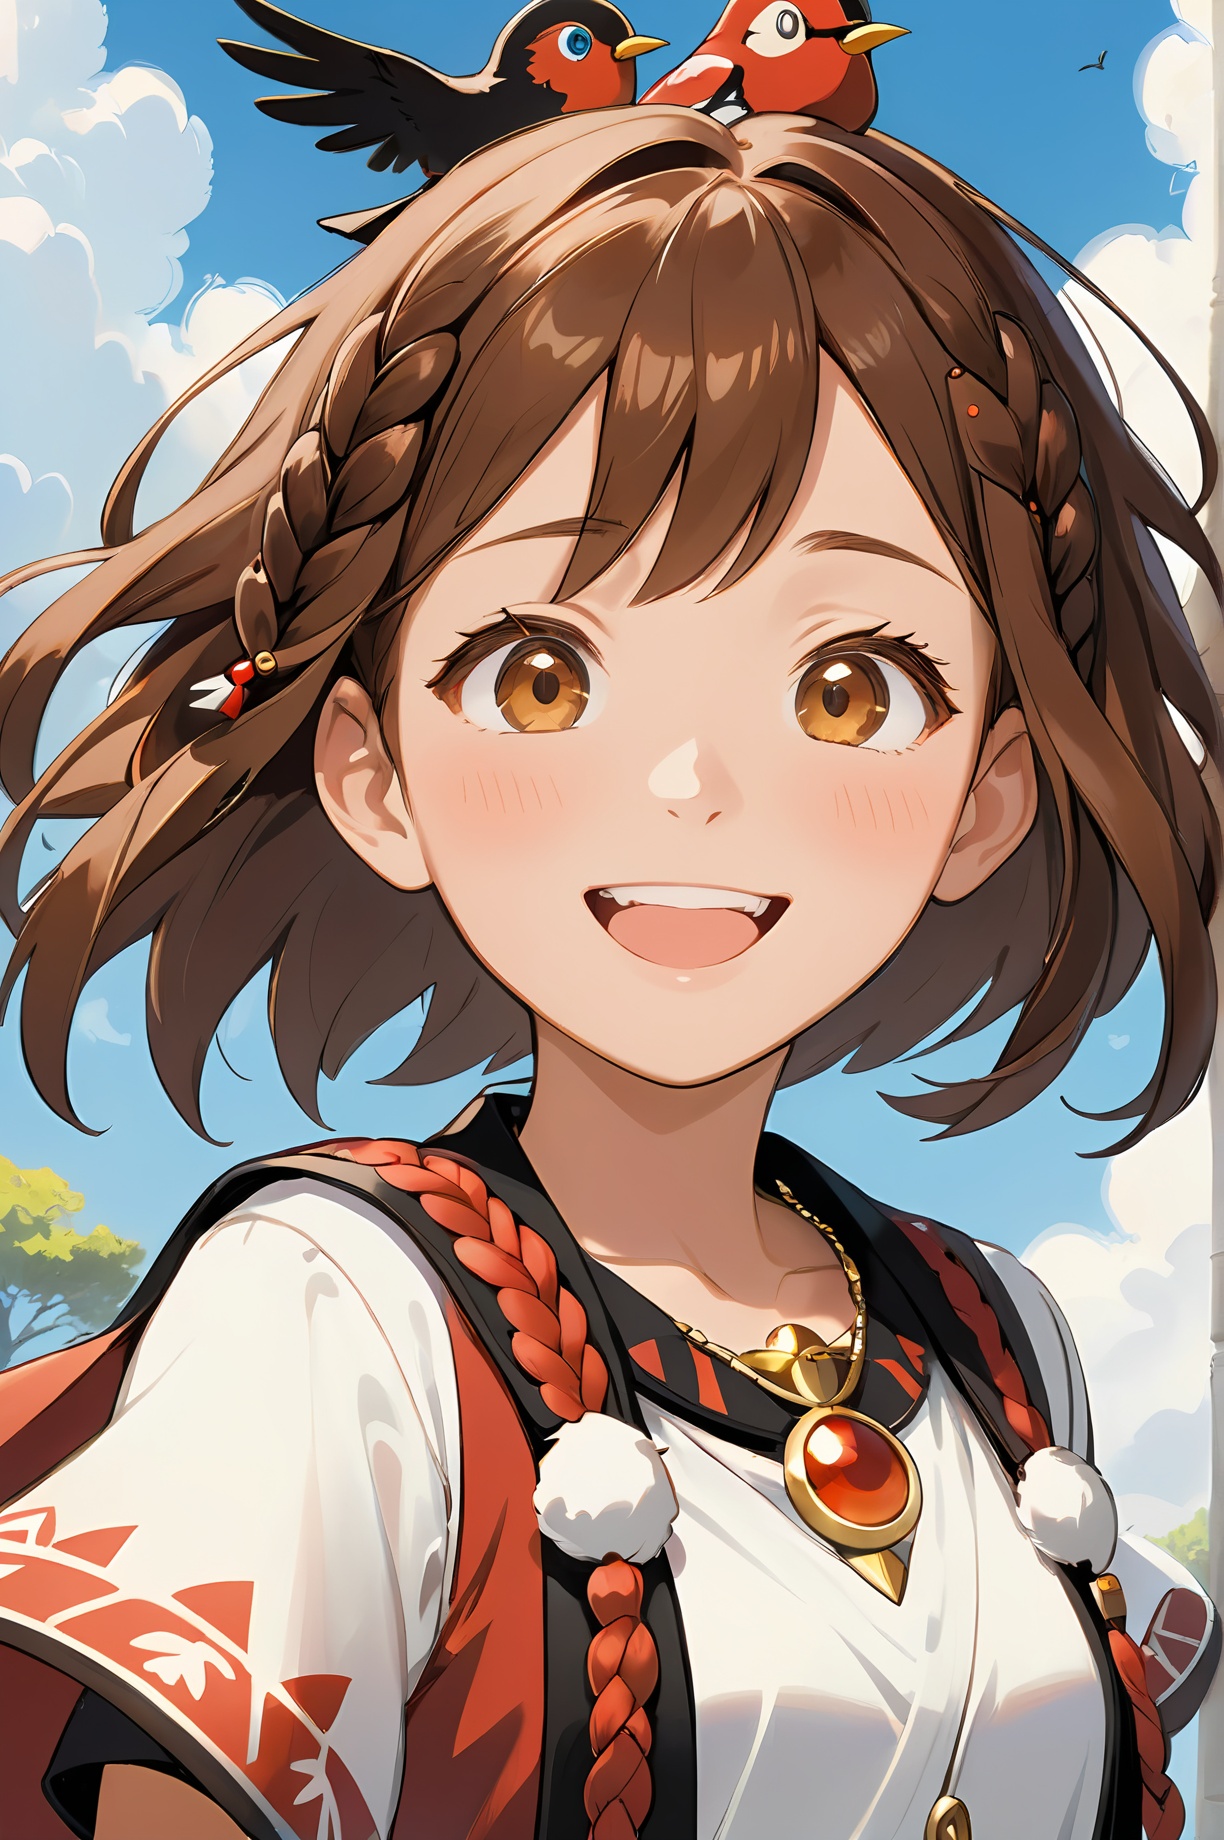 A magical girl in a red and black tribal outfit,with a bird perched on her head. A full art illustration in a flat anime style,her twin braids and jewelry adding to her charm. An upper body portrait of this unique character with one eye red,Girl Smiling Skyward,Studio Ghibli Film Style,Blushing,Joyous Expression,Promotional Film Still,Brunette Girl,Low Angle View,Charming Character Design,Zookeeper,Round-faced Character,Windy Scene,Medium Close Shot,Sunlit Scene,Excited Mood,Milk Element,Flying Hair,Opening Scene,Bashful Expression,Arik Roper Art Style,Solo Girl,Sky,Cloud,Brown Hair,Smile,Brown Eyes,Open Mouth,Blue Sky,Jewelry,Daytime,Shirt,Necklace,Viewer Engagement,White Shirt,Outdoor Scene,Short Hair,looking at viewer,